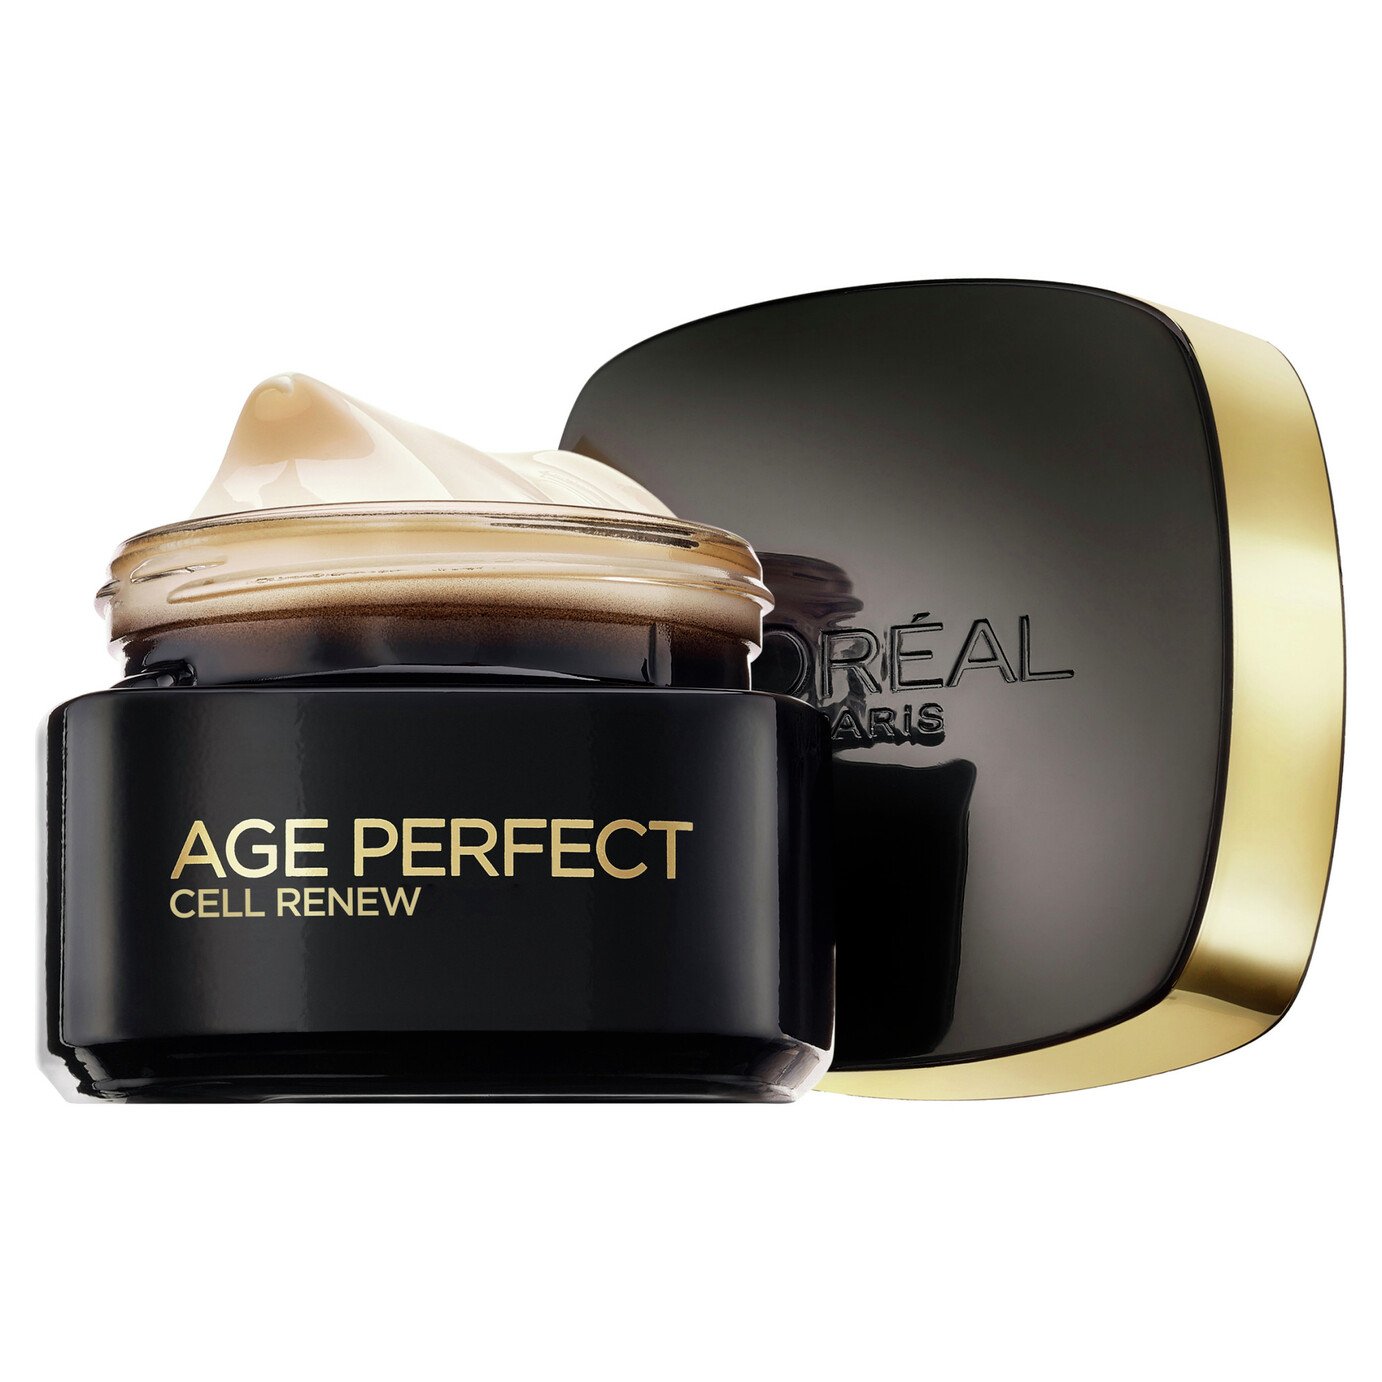 L'Oreal Paris Skin Age Perfect Cell Renew Day Cream Review